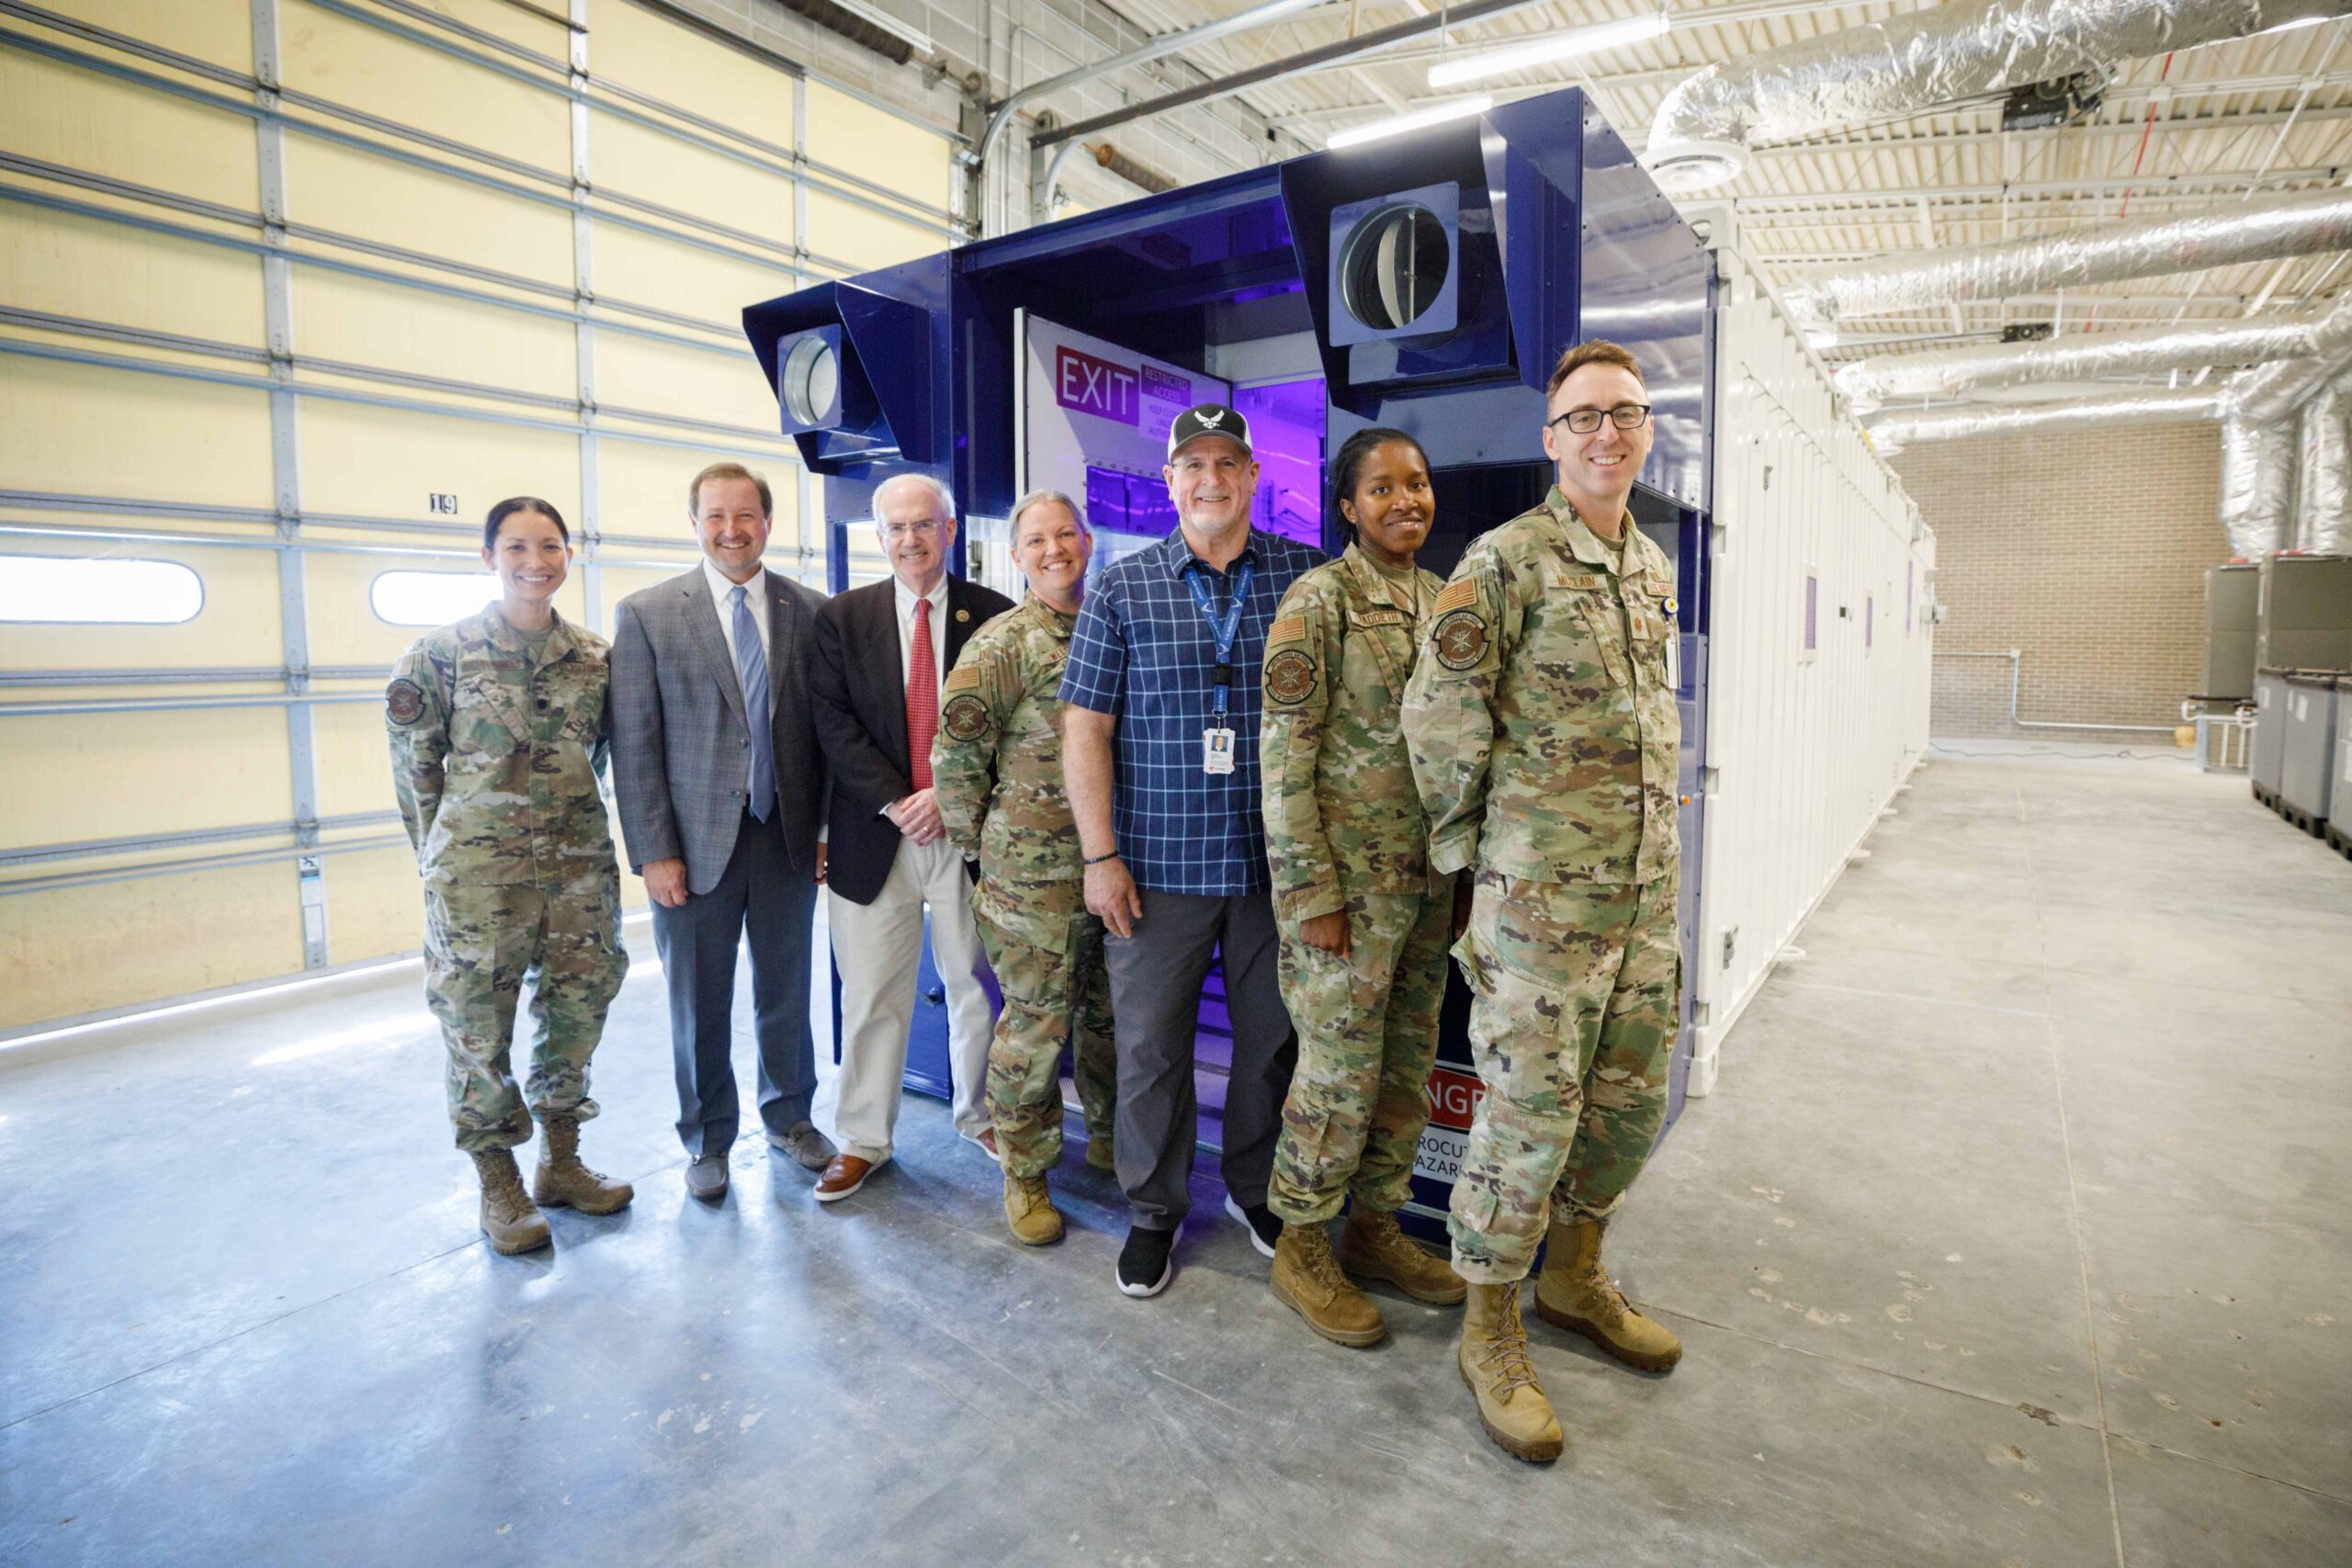 The Negatively Pressurized Conex training unit will be housed in the Infectious Diseases Air Transport Training Facility when the facility is completed&period; From left&comma; Lt&period; Col&period; Elizabeth Schnaubelt&comma; MD&comma; Chris Kratochvil&comma; MD&comma; UNMC Chancellor Jeffrey P&period; Gold&comma; MD&comma; Maj&period; Tiffany Welsh&comma; Bob Valentine&comma; Maj&period; Felecia Craddieth&comma; Maj&period; John McClain&comma; MD&period;